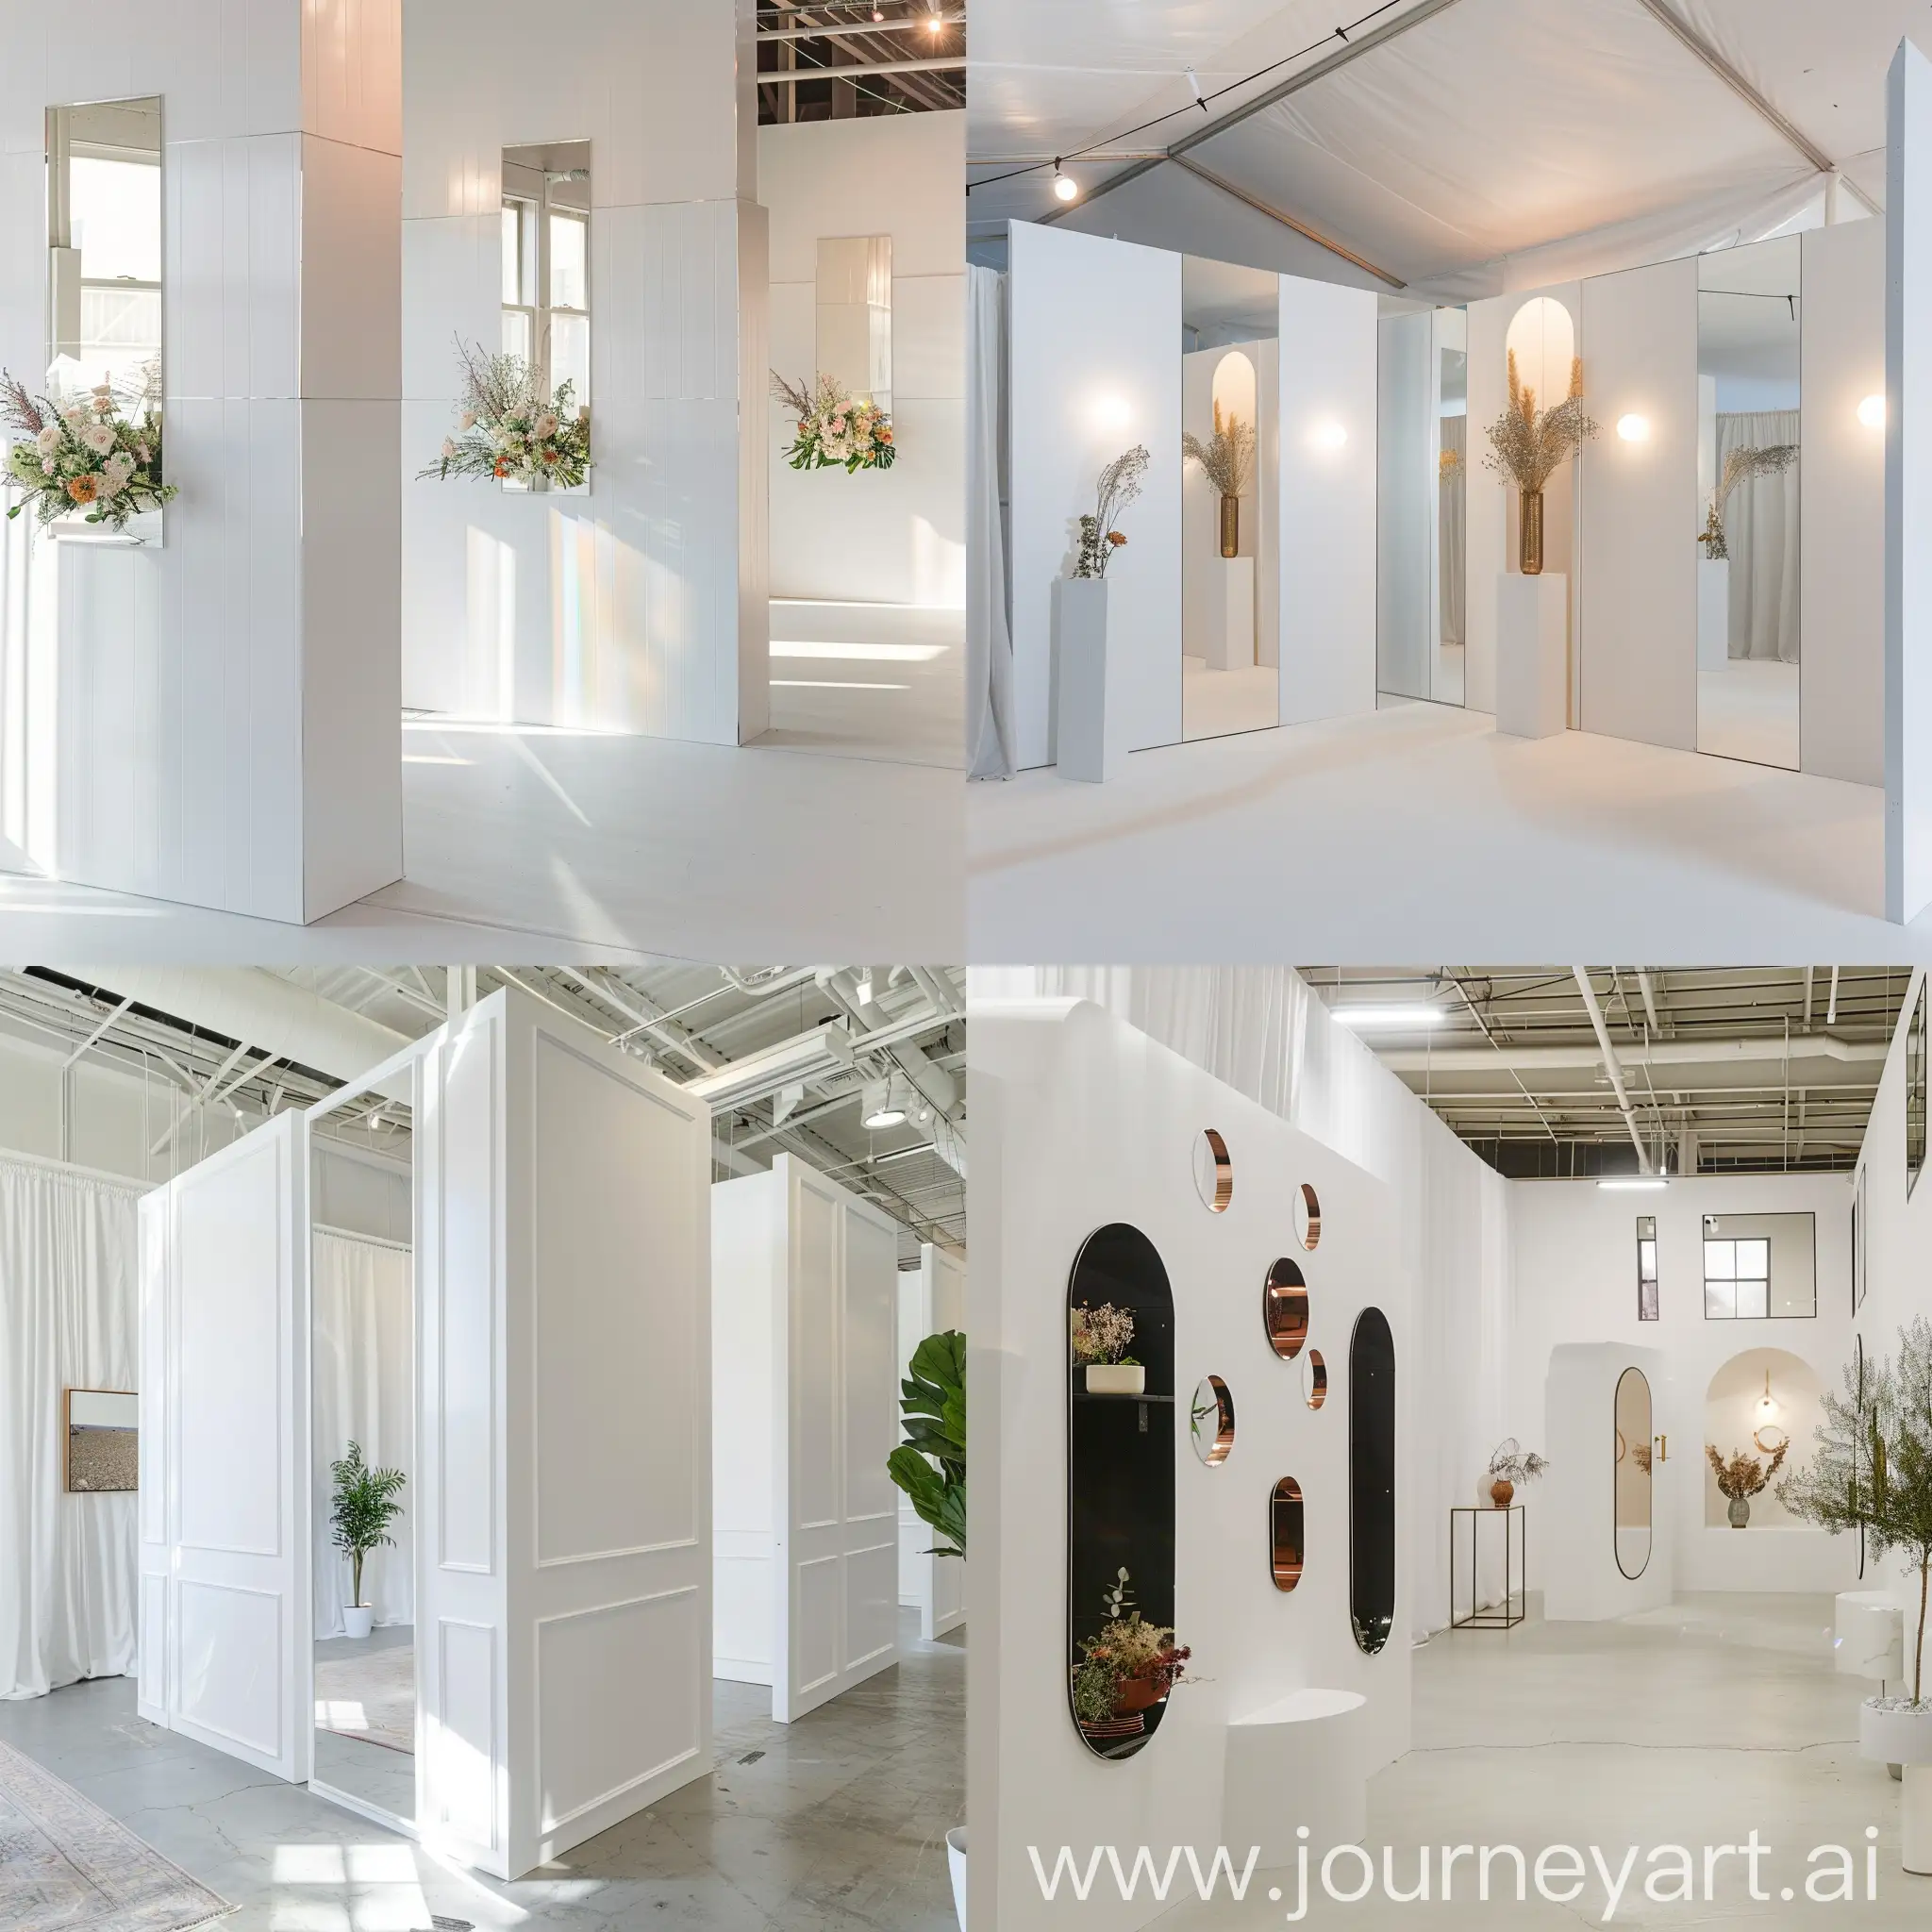 Generate an image of a pop-up event space with crisp white walls adorned with accent walls featuring  Mirrored wall panels are strategically placed to enhance the sense of space and brightness.